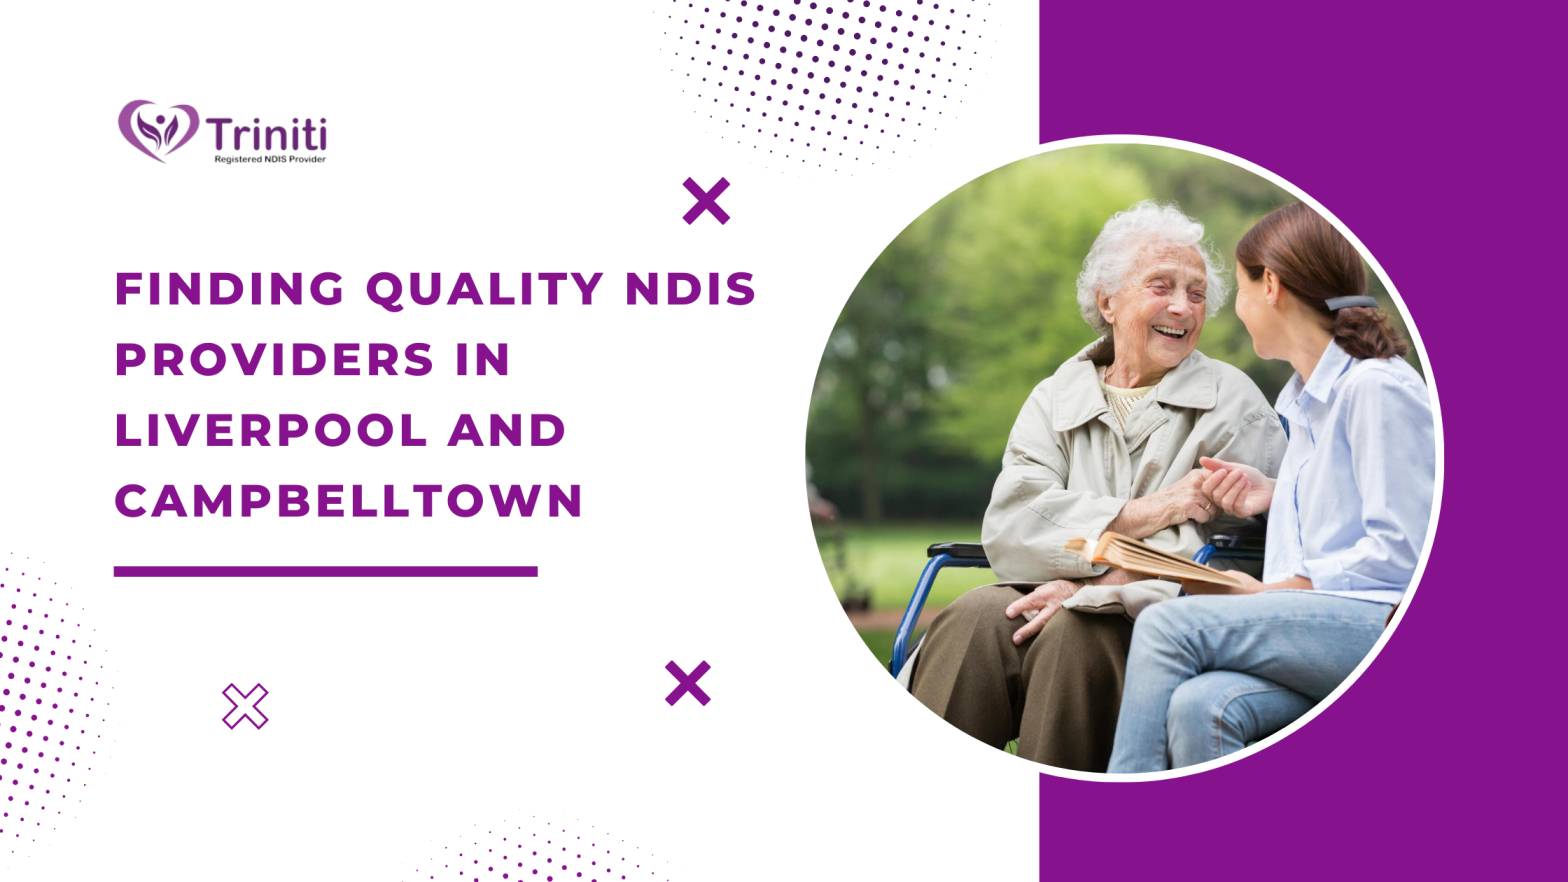 Finding Quality NDIS Providers in Liverpool and Campbelltown